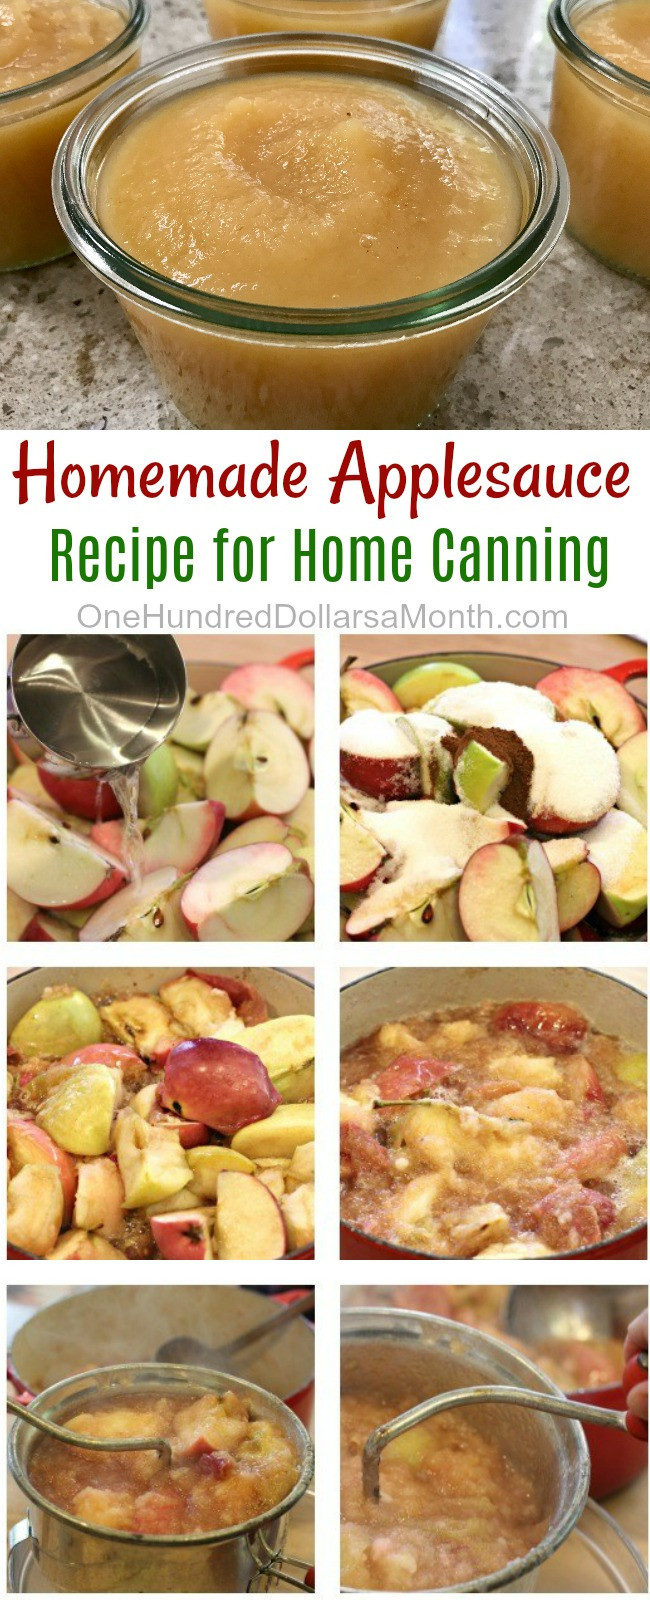 Canning Applesauce Recipe
 Canning 101 How to Make Homemade Applesauce e